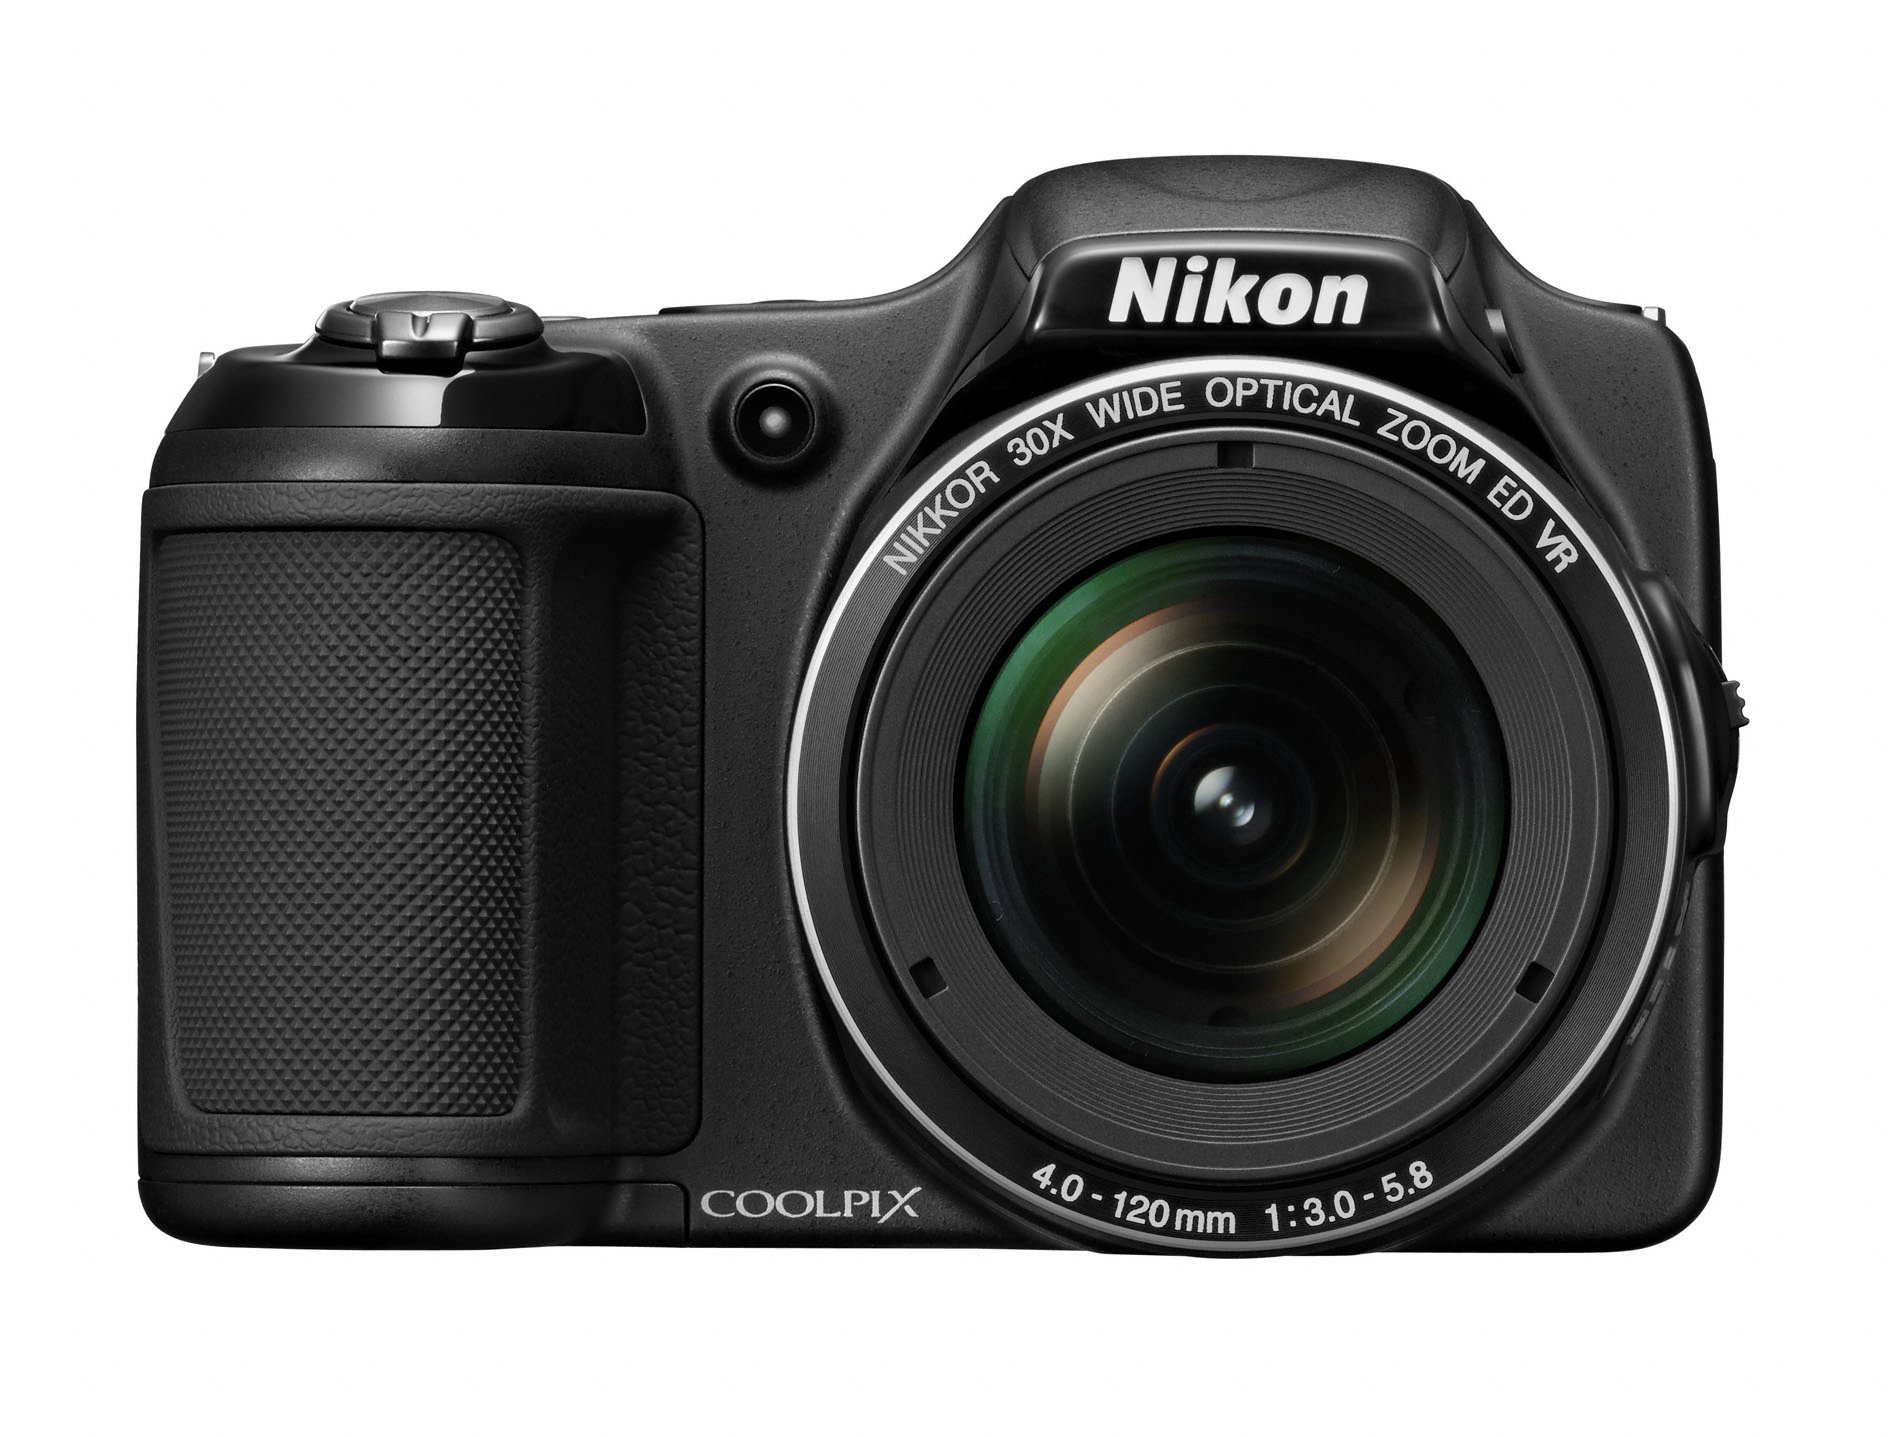 Nikon COOLPIX L820 16 MP CMOS Digital Camera with 30x Zoom Lens and Full HD 1080p Video (Black) (OLD MODEL)